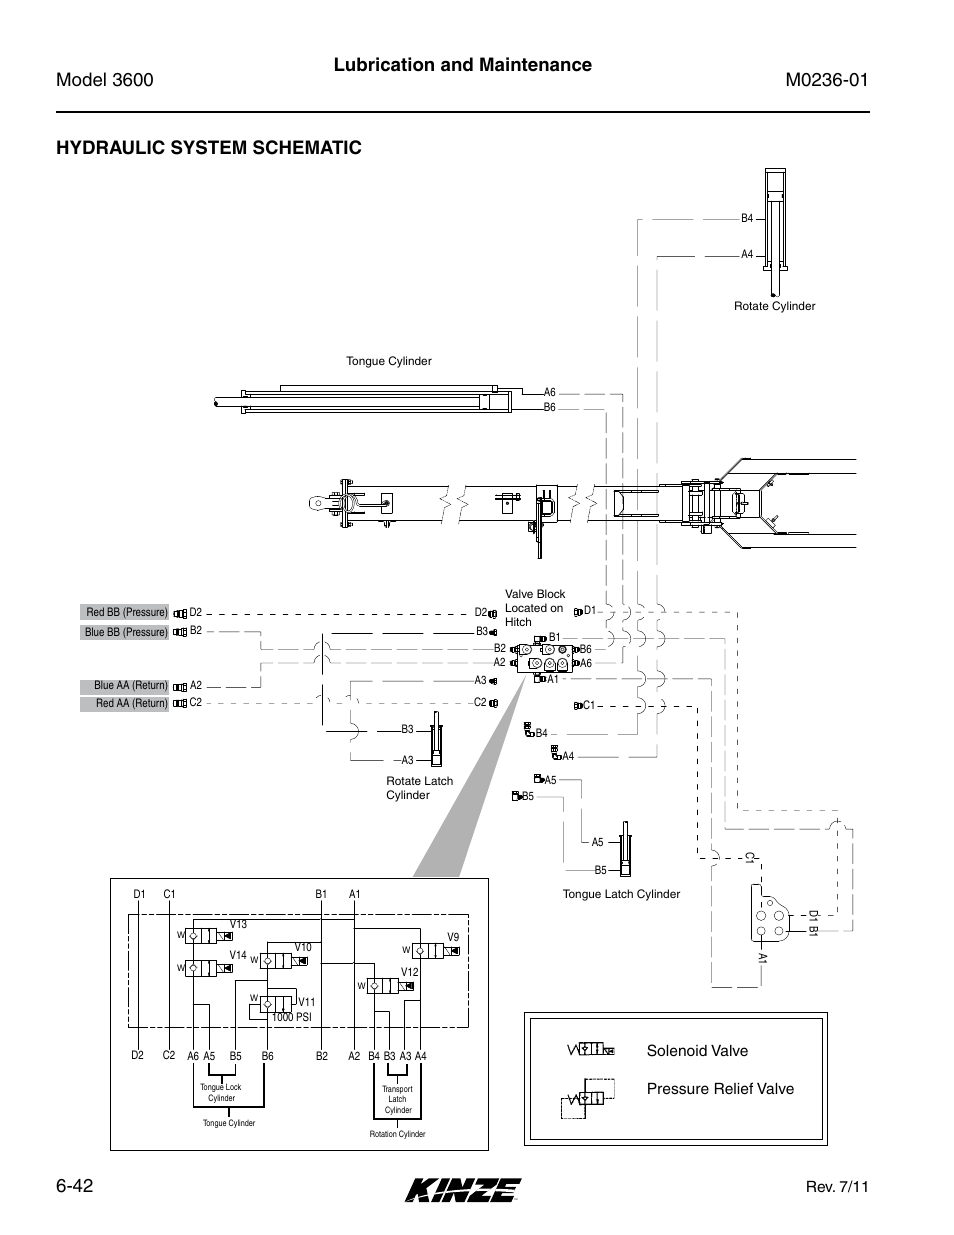 Hydraulic system schematic, Hydraulic system schematic -42, Lubrication and maintenance | Rev. 7/11, Solenoid valve pressure relief valve | Kinze 3600 Lift and Rotate Planter Rev. 7/14 User Manual | Page 150 / 172